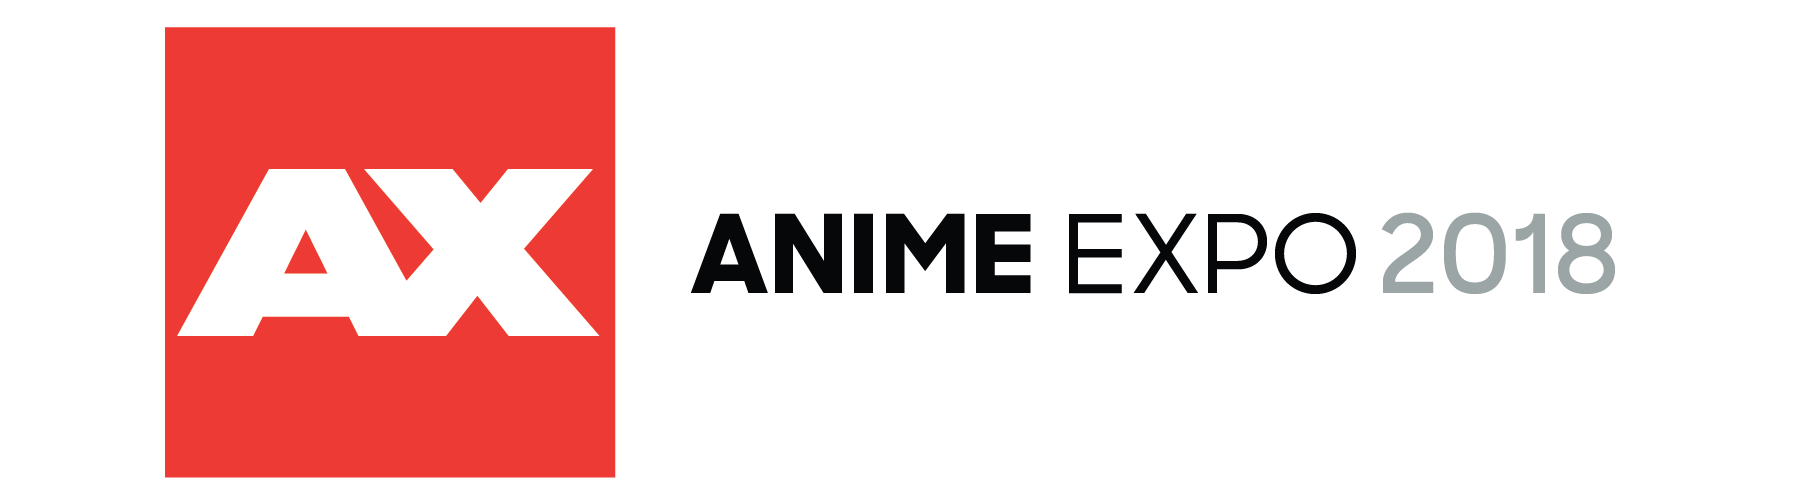 Highlights from Anime Expo 2018 - Level Up Media